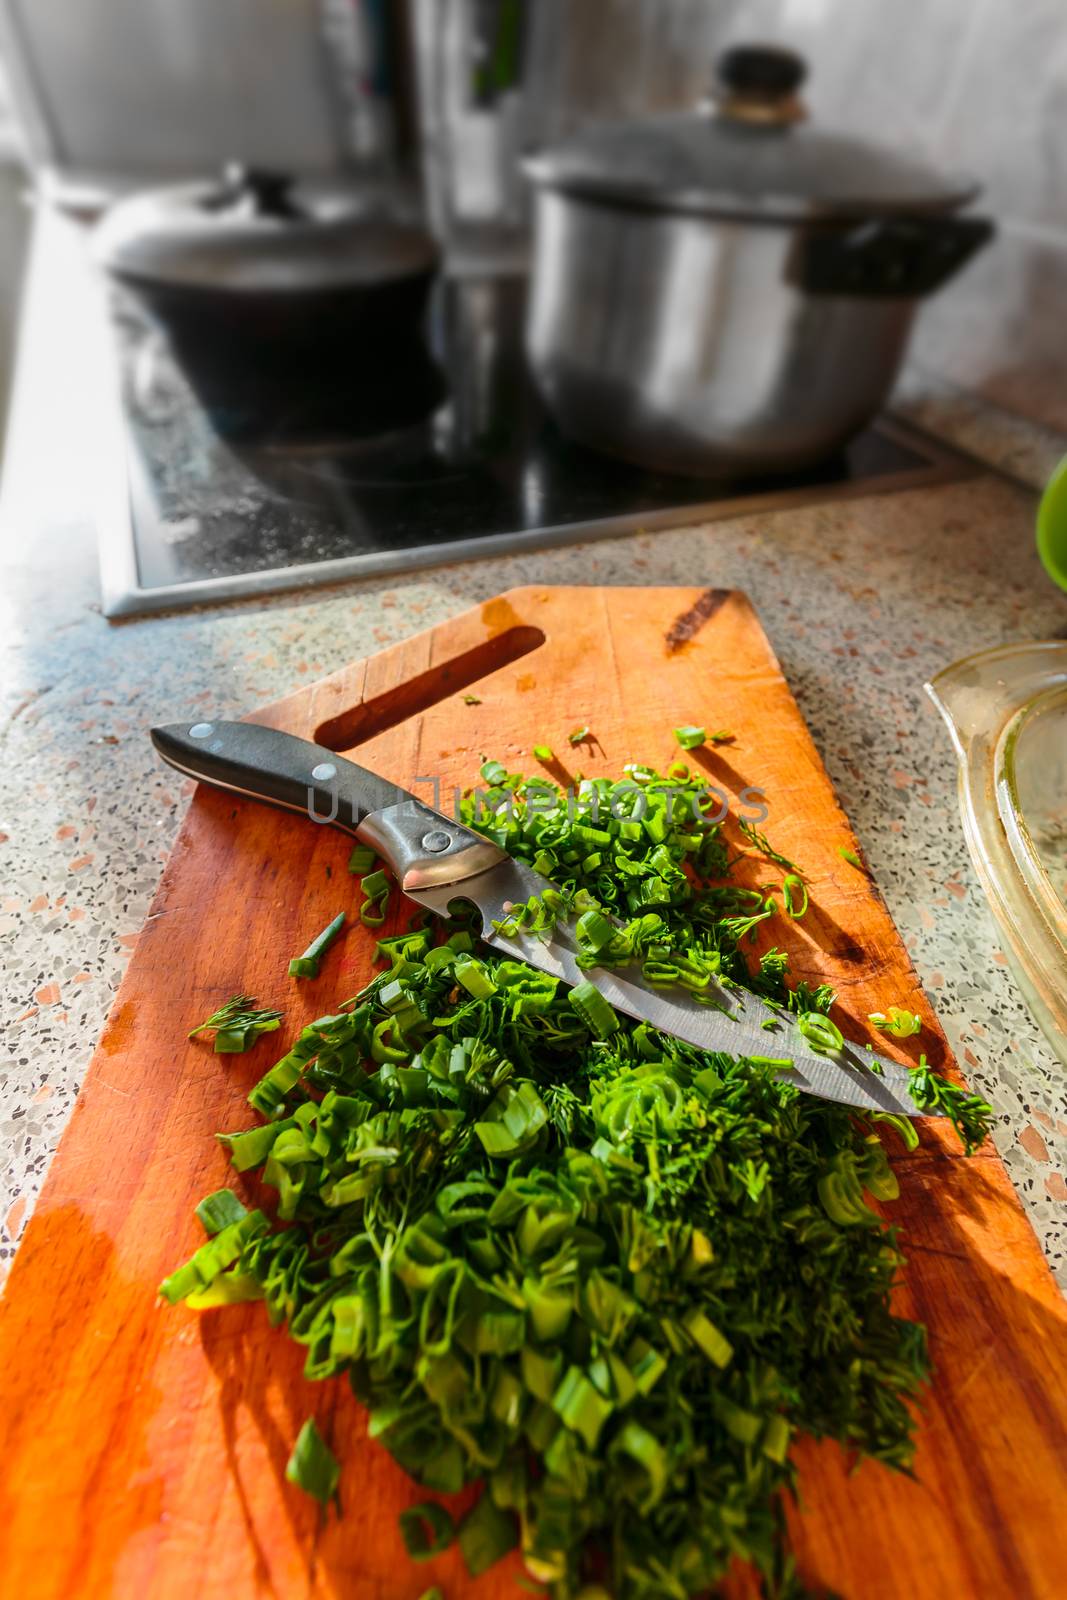 Chopped green onions and dill on a wooden board